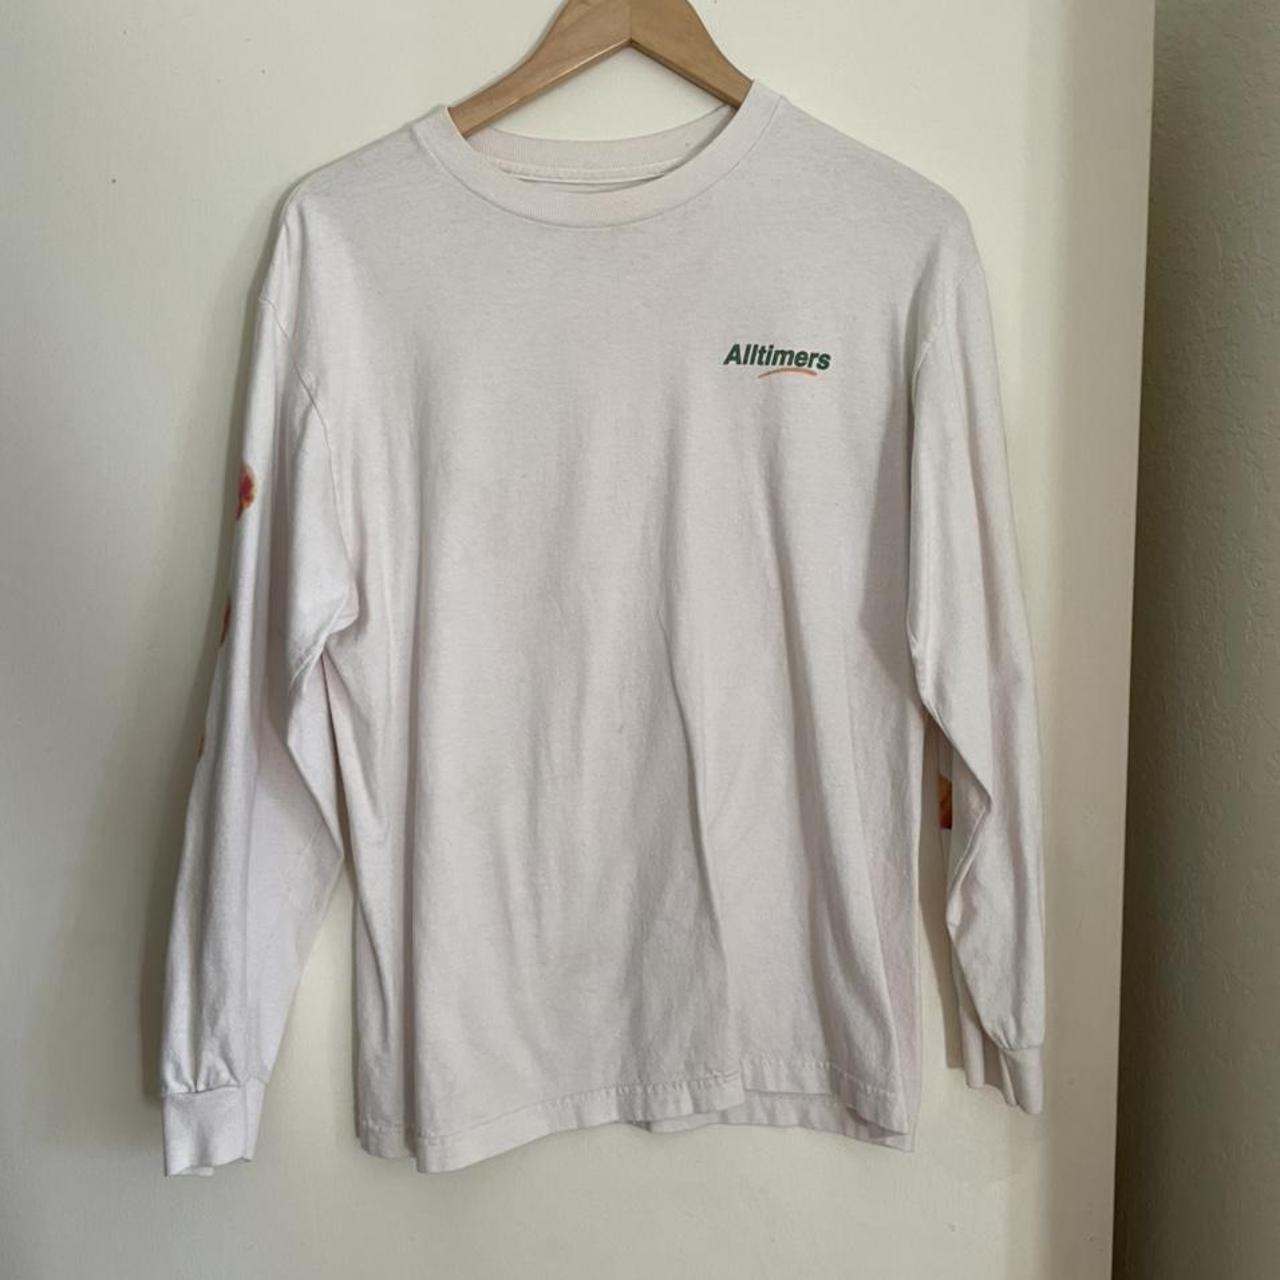 Product Image 1 - Alltimers Peachy Long Sleeve Tee

Bought